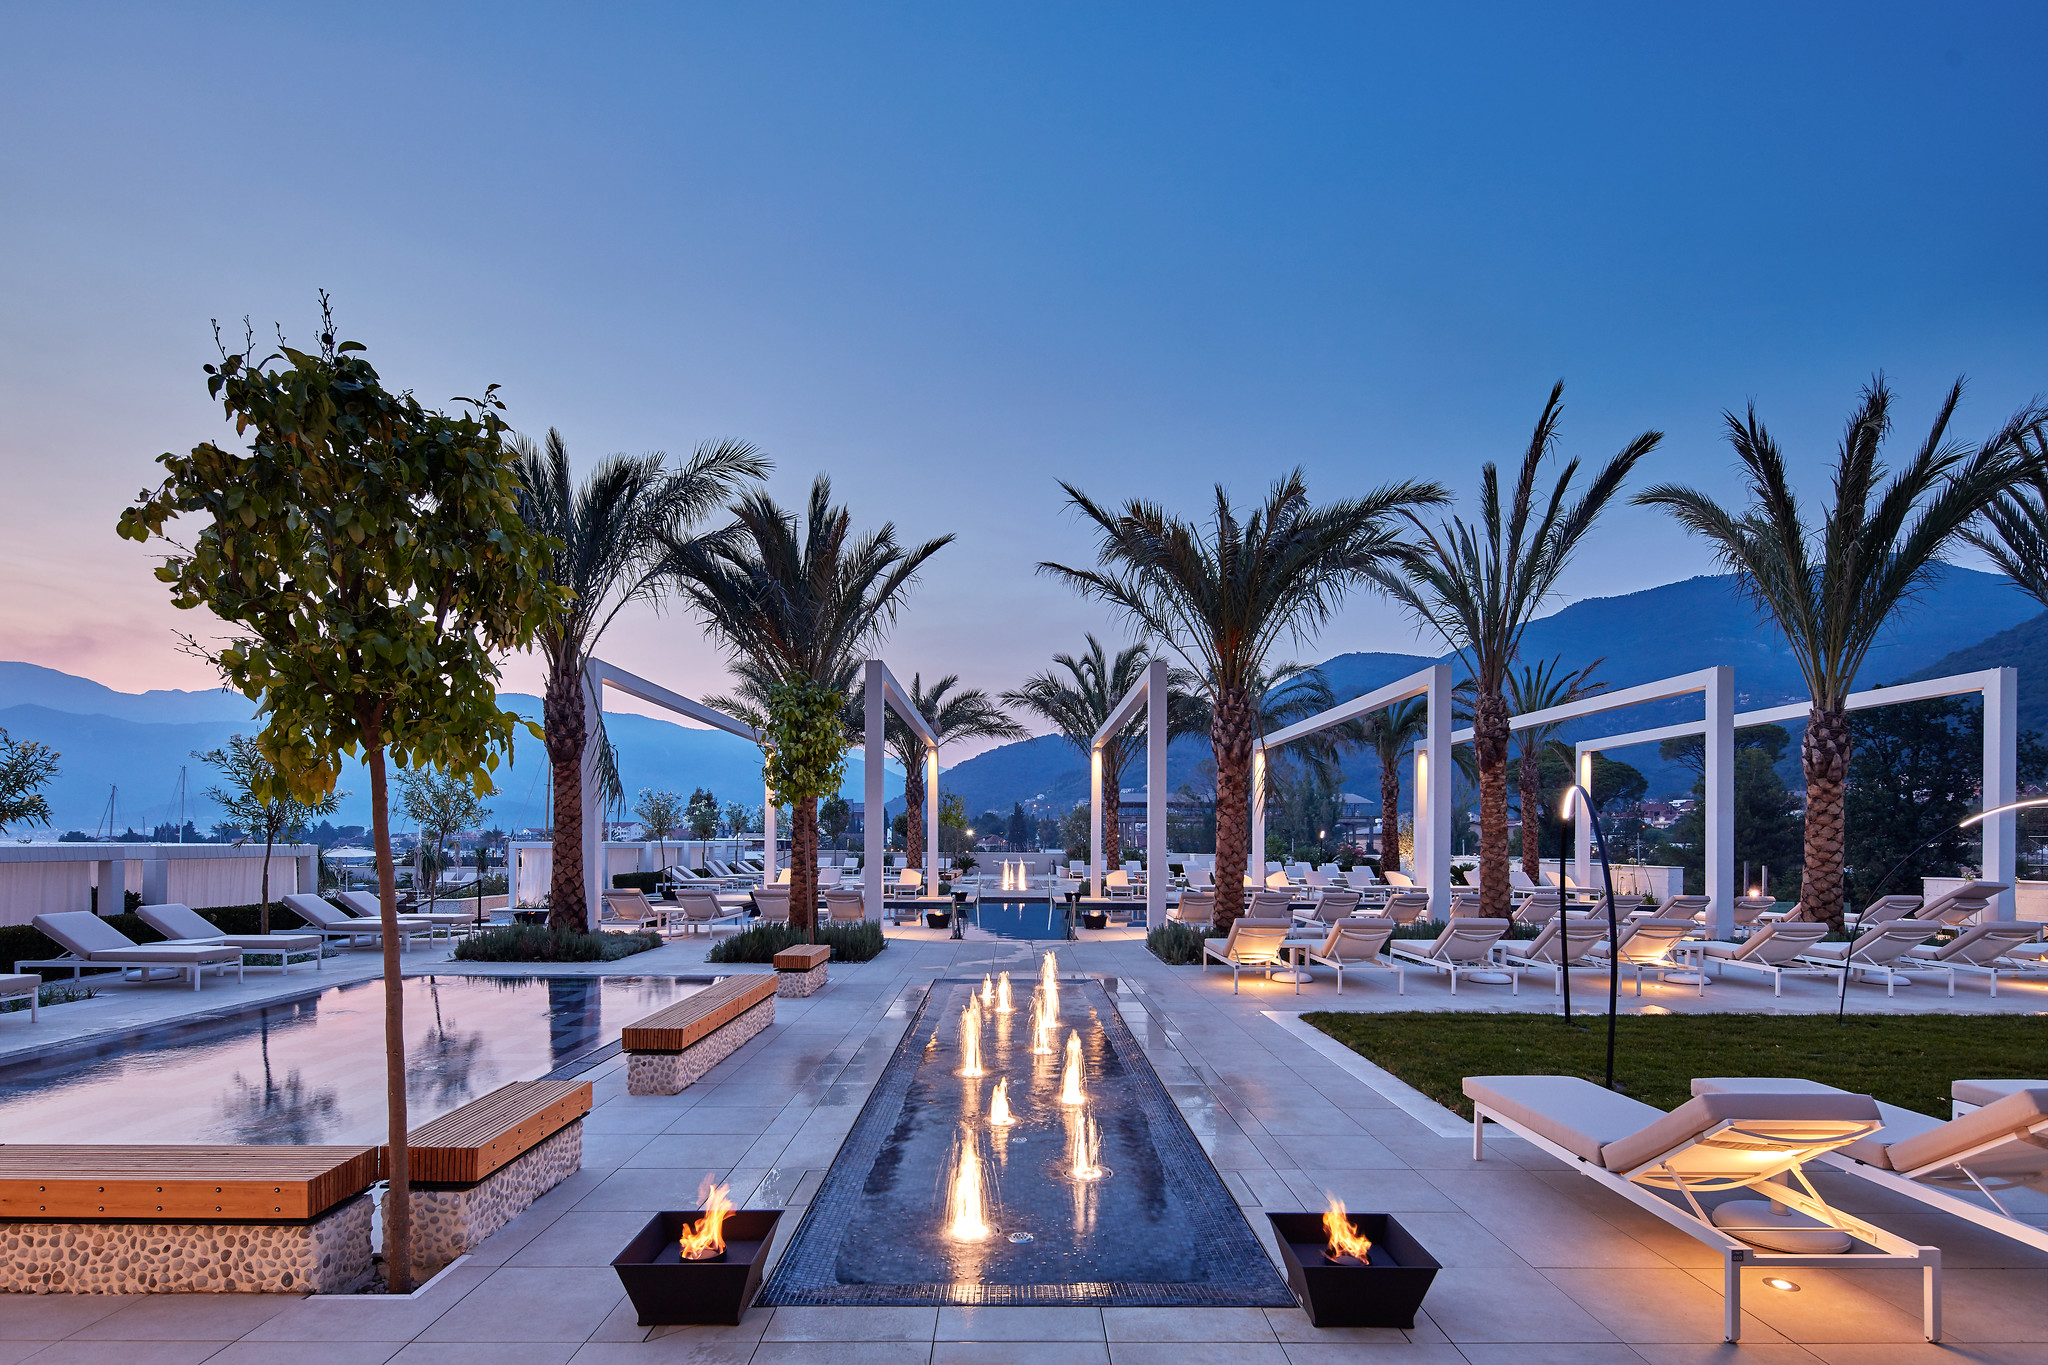 Porto Montenegro in cooperation with Wall Street Luxury Europe